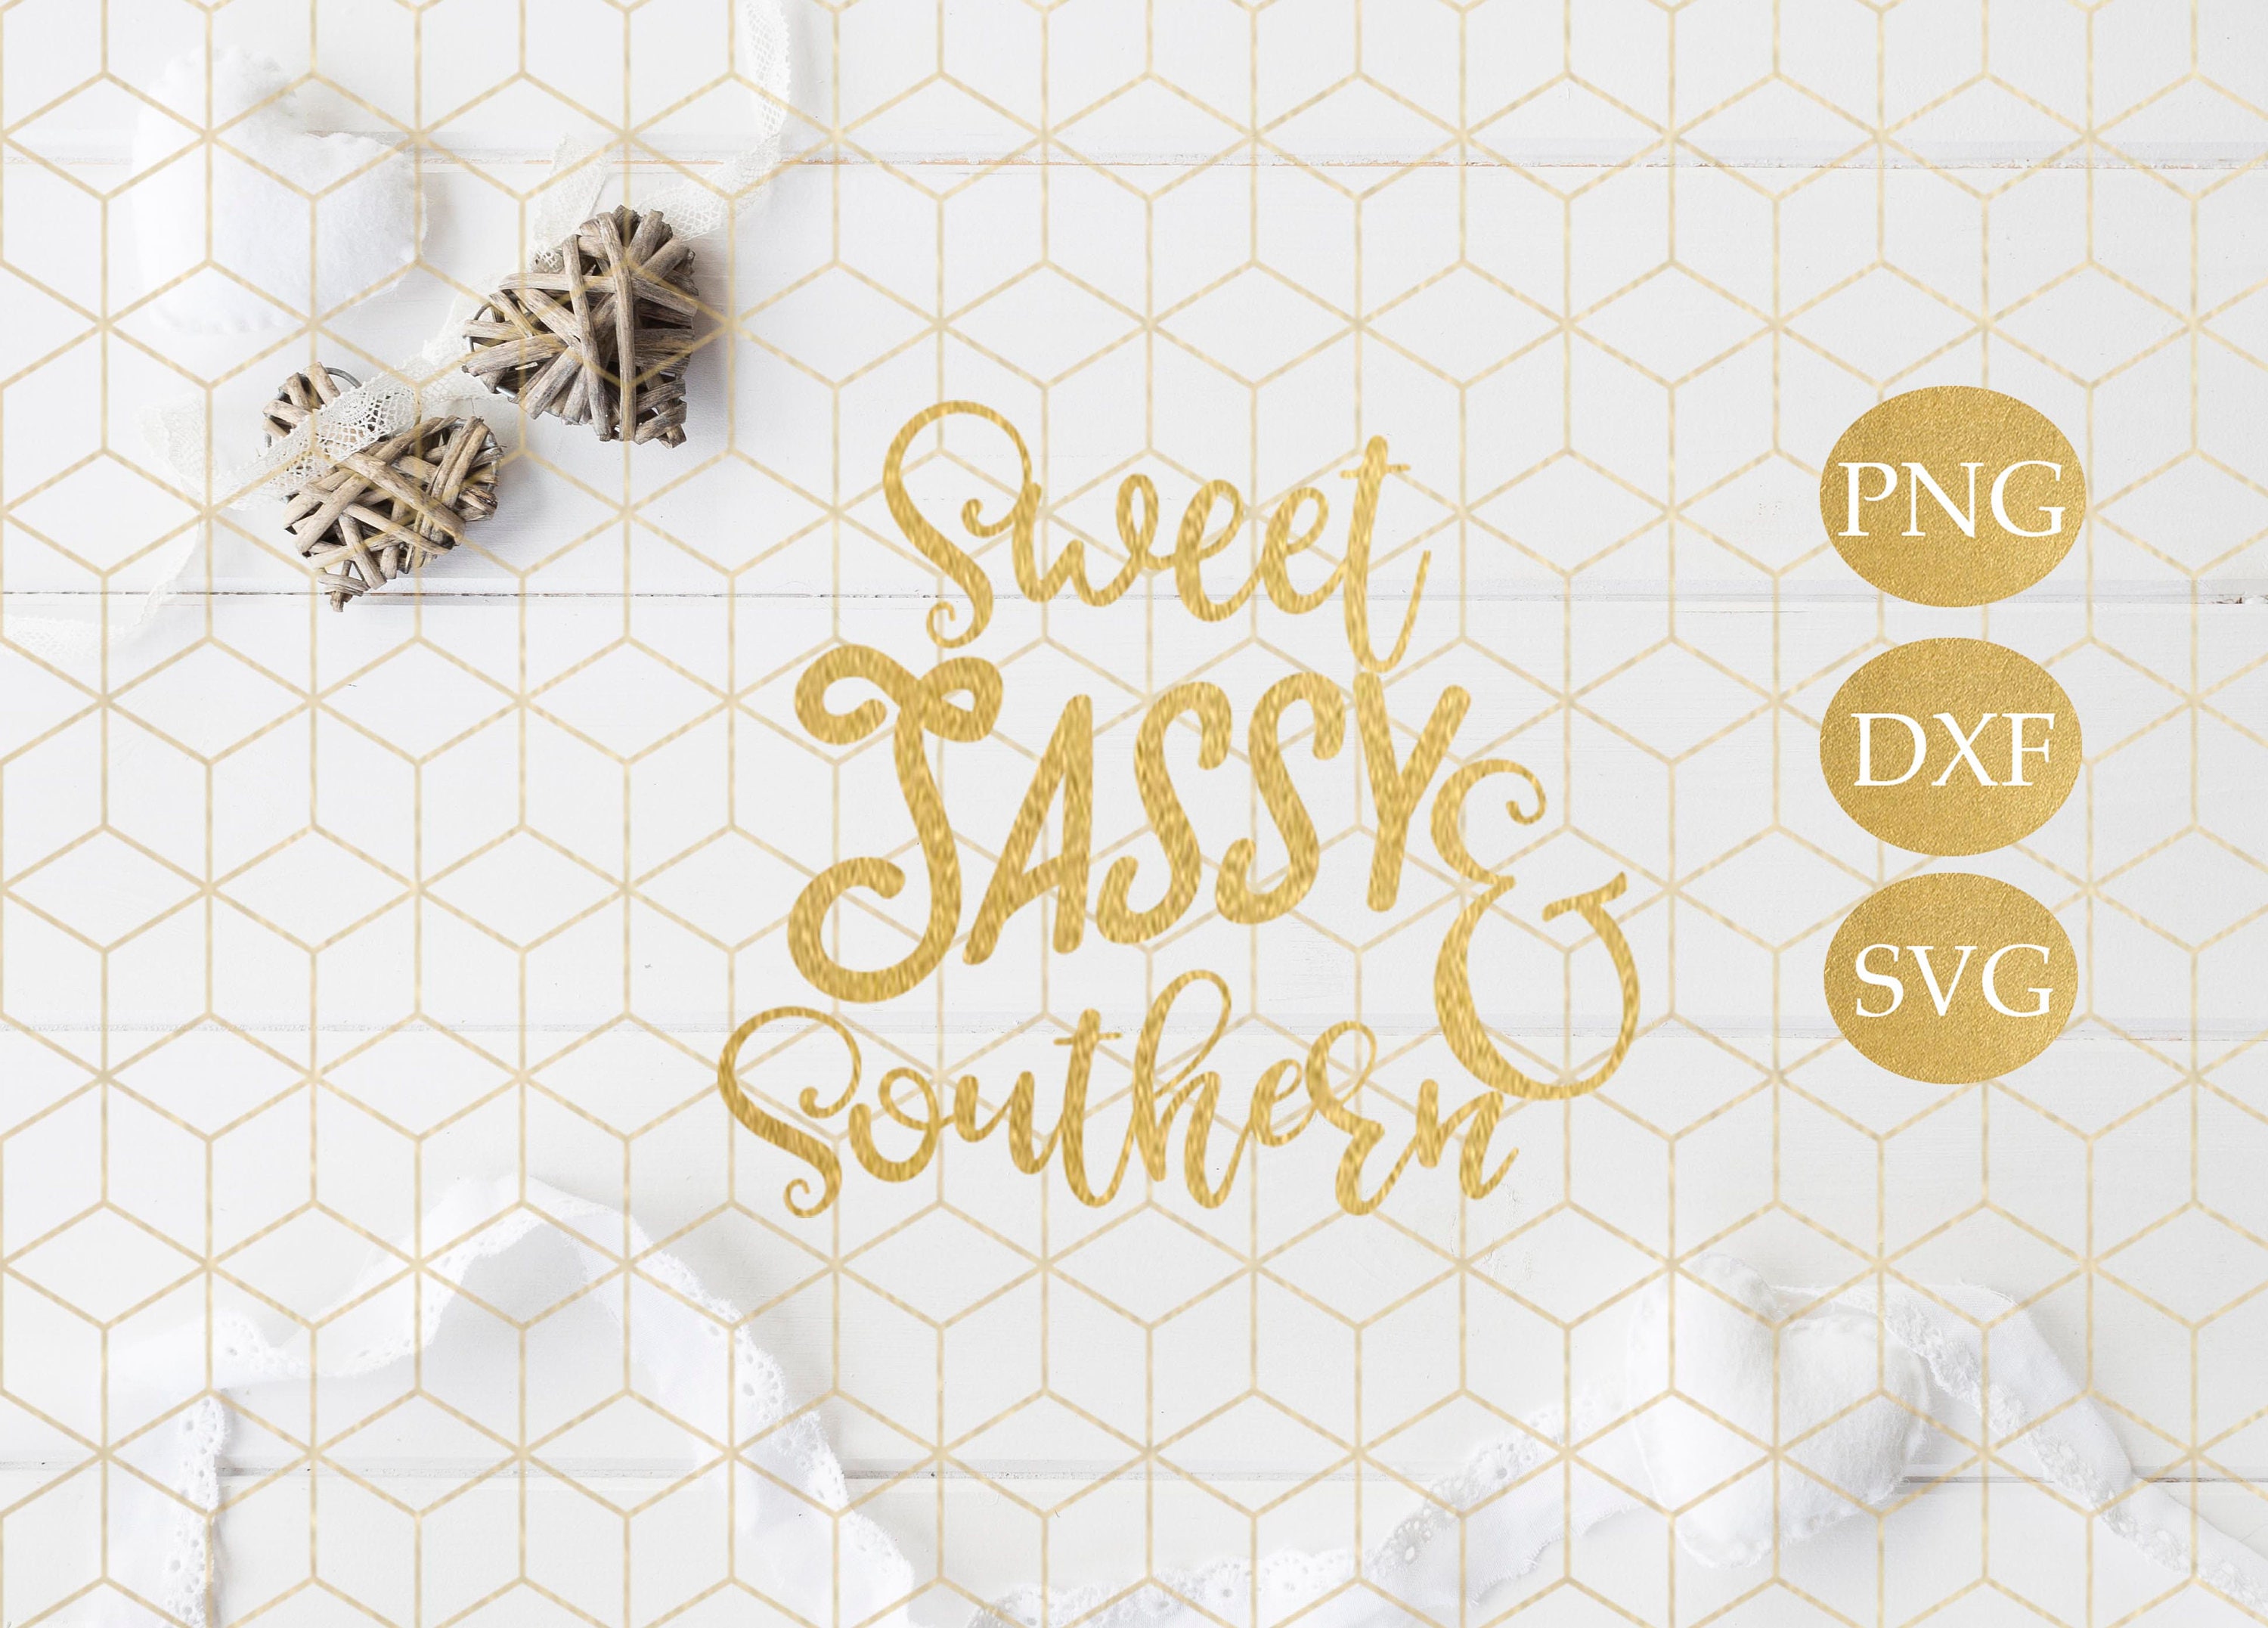 Sweet Sassy and Southern SVG Southern SVG Cutting file